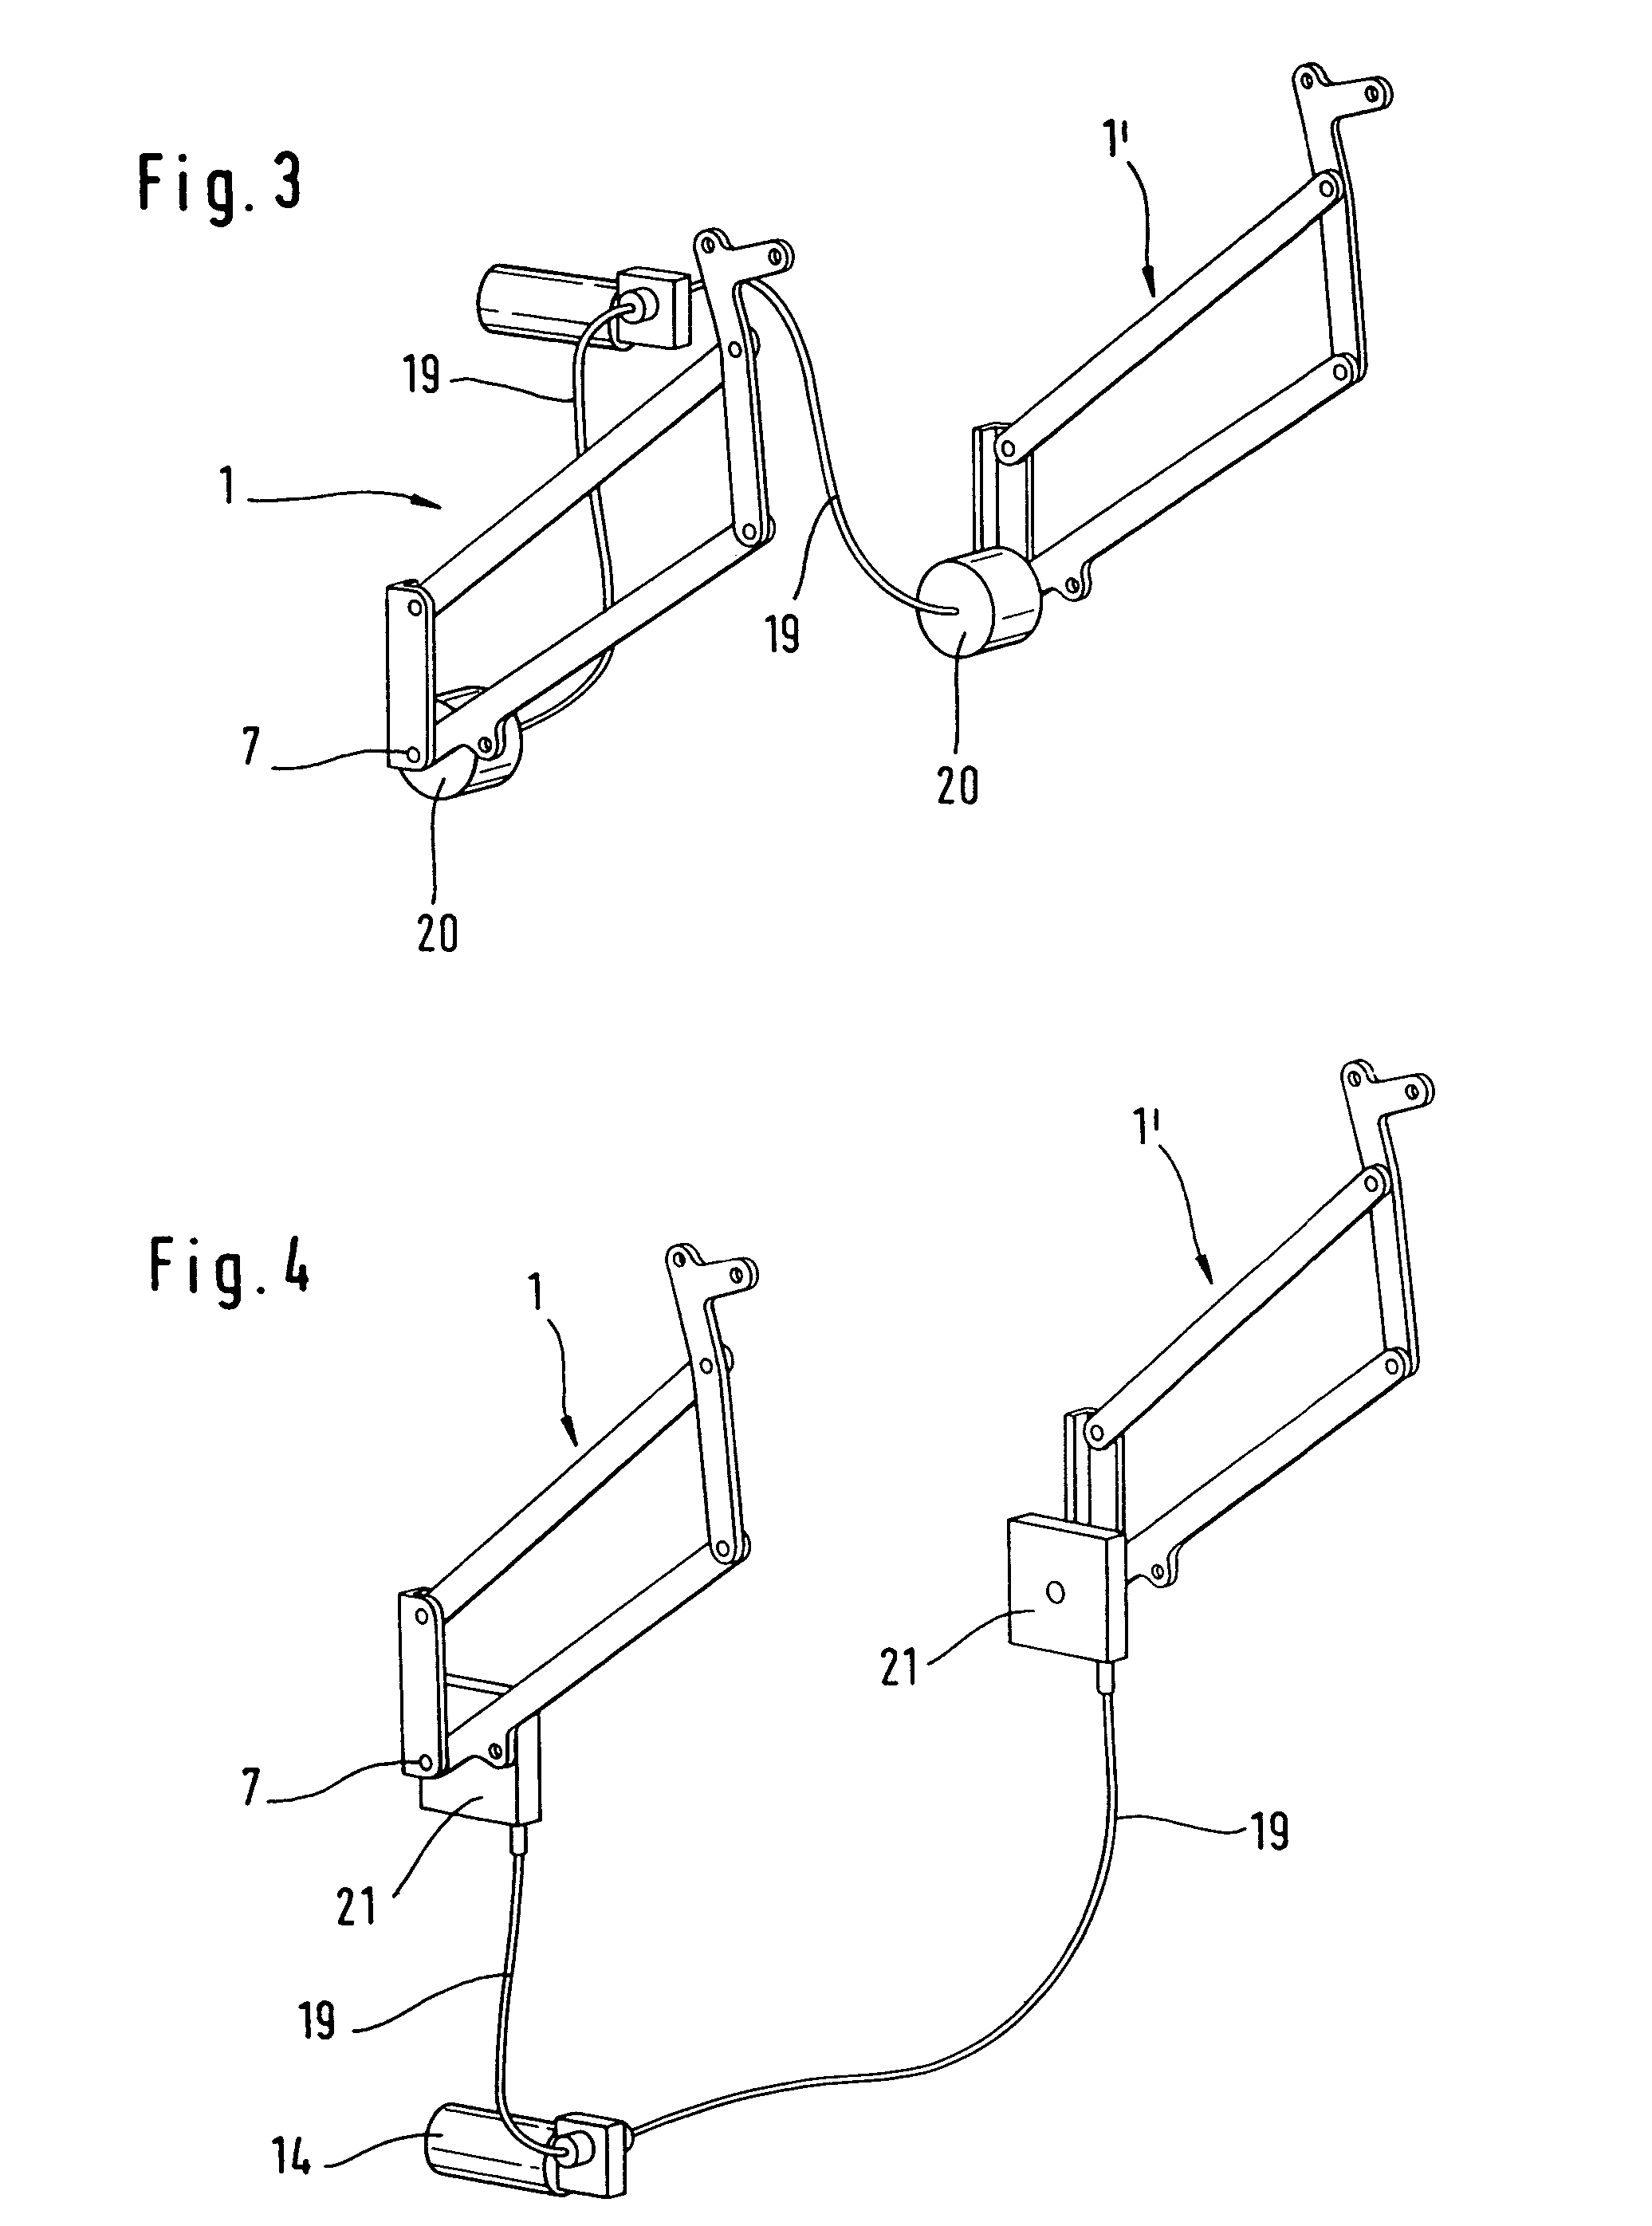 Drive for opening and closing a vehicle flap